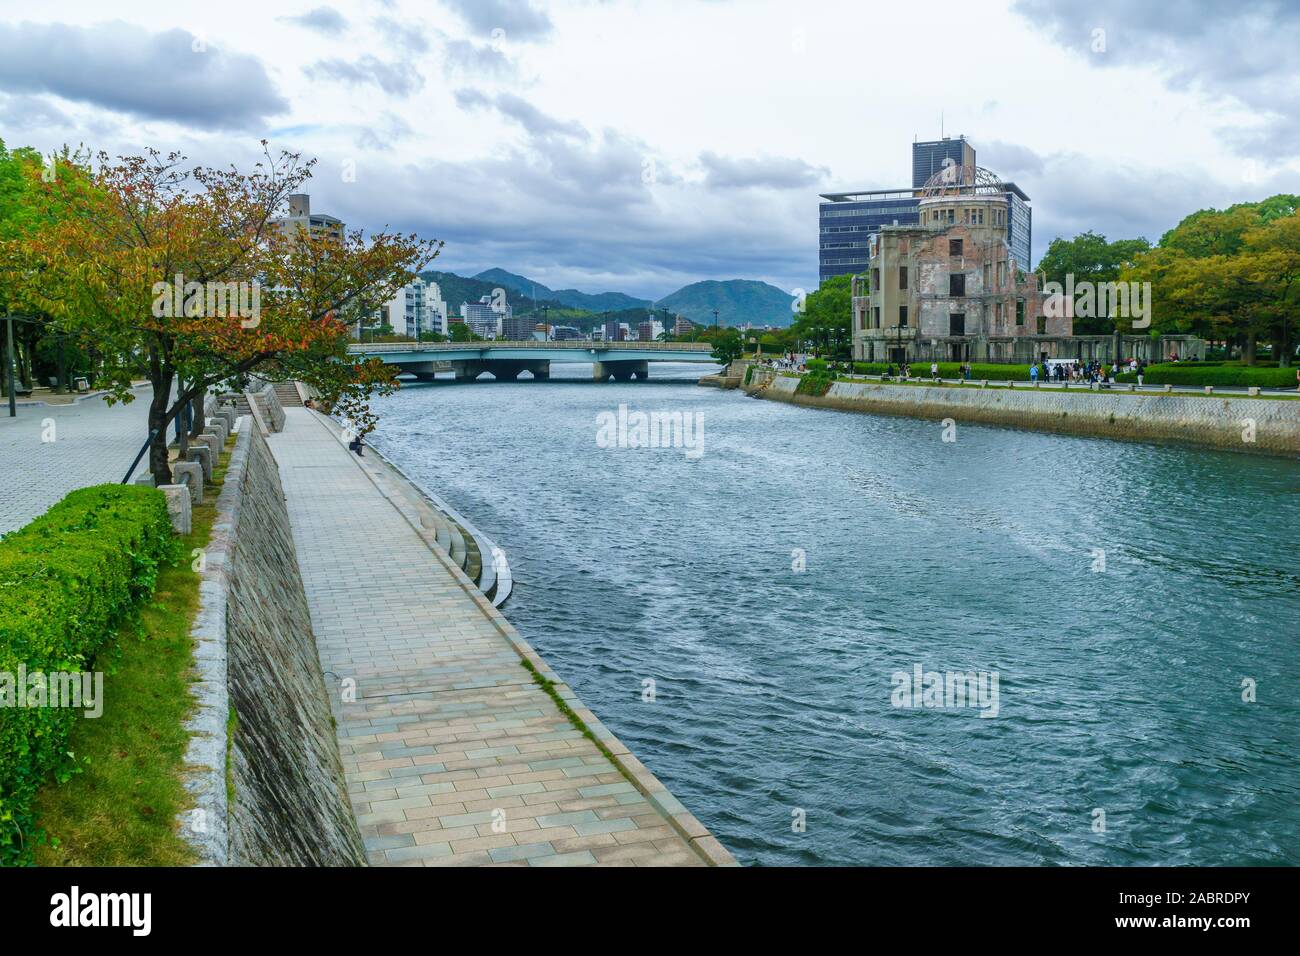 Hiroshima, Japan - October 12, 2019: View of the Atomic Bomb Dome, with locals and visitors, in Hiroshima, Japan Stock Photo